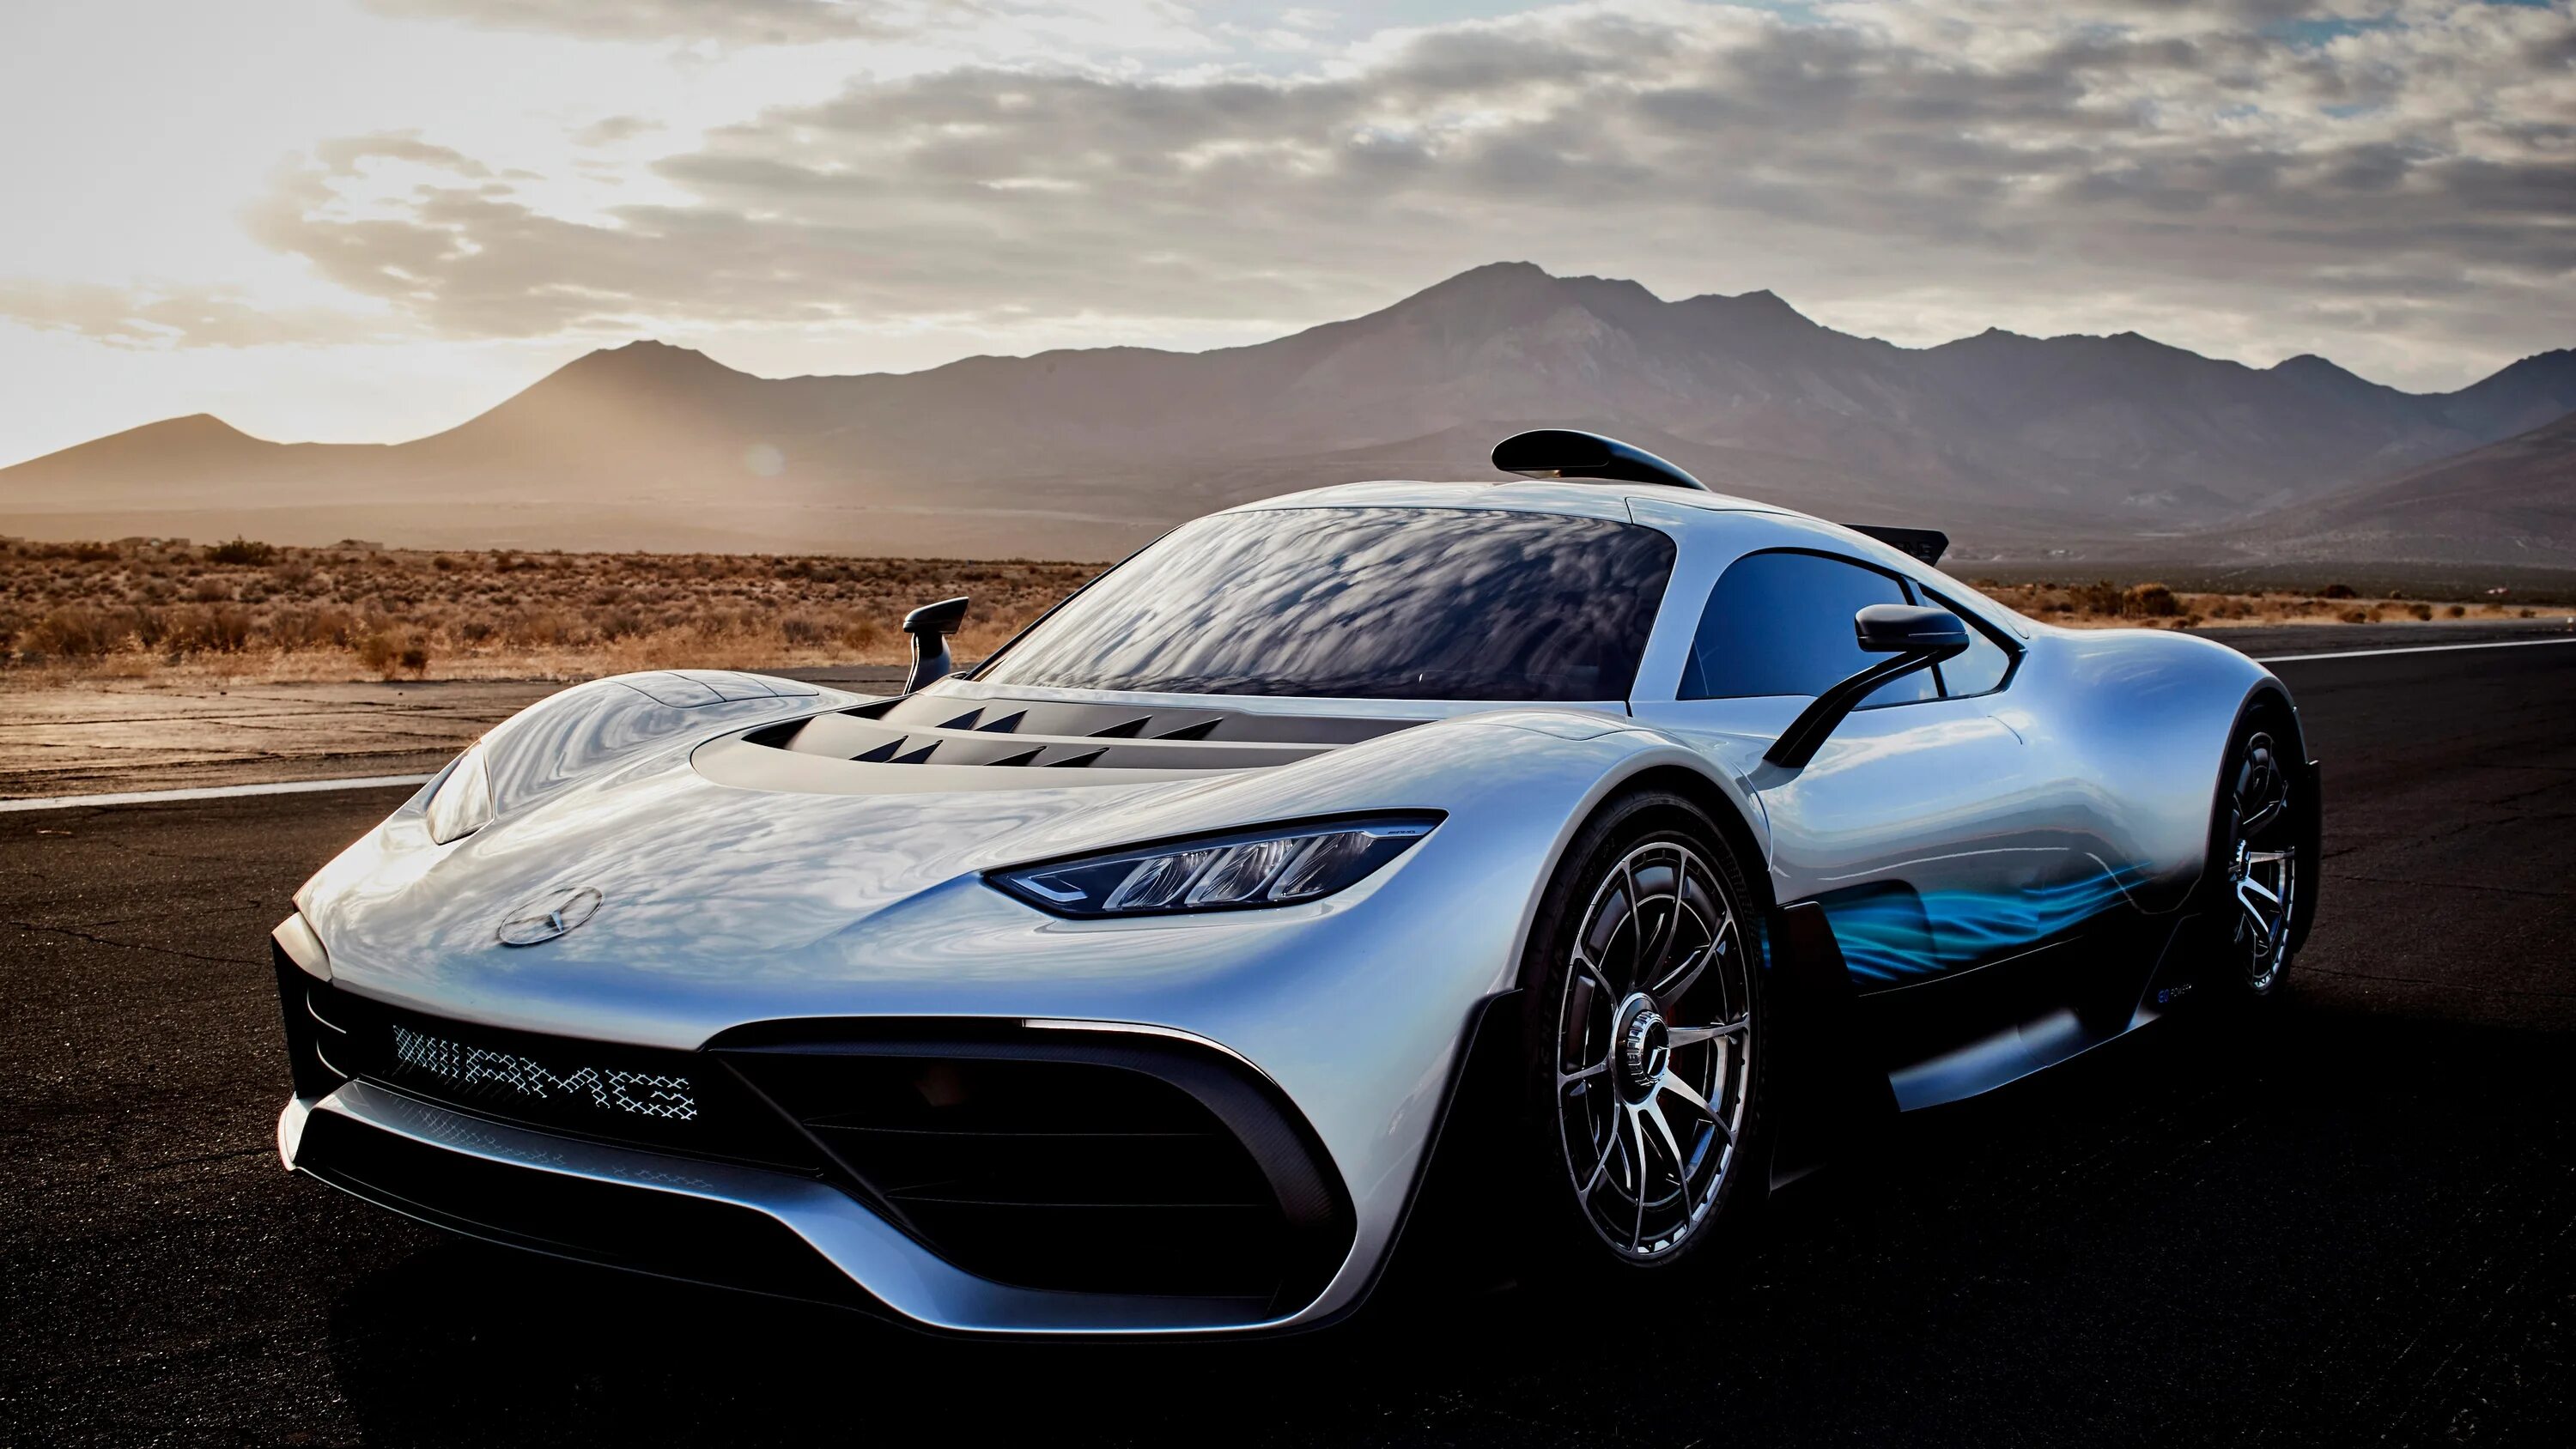 Mercedes Benz AMG one. Mercedes Benz AMG Project one. Мерседес гиперкар 2021. Mercedes AMG 1. Project 1.2